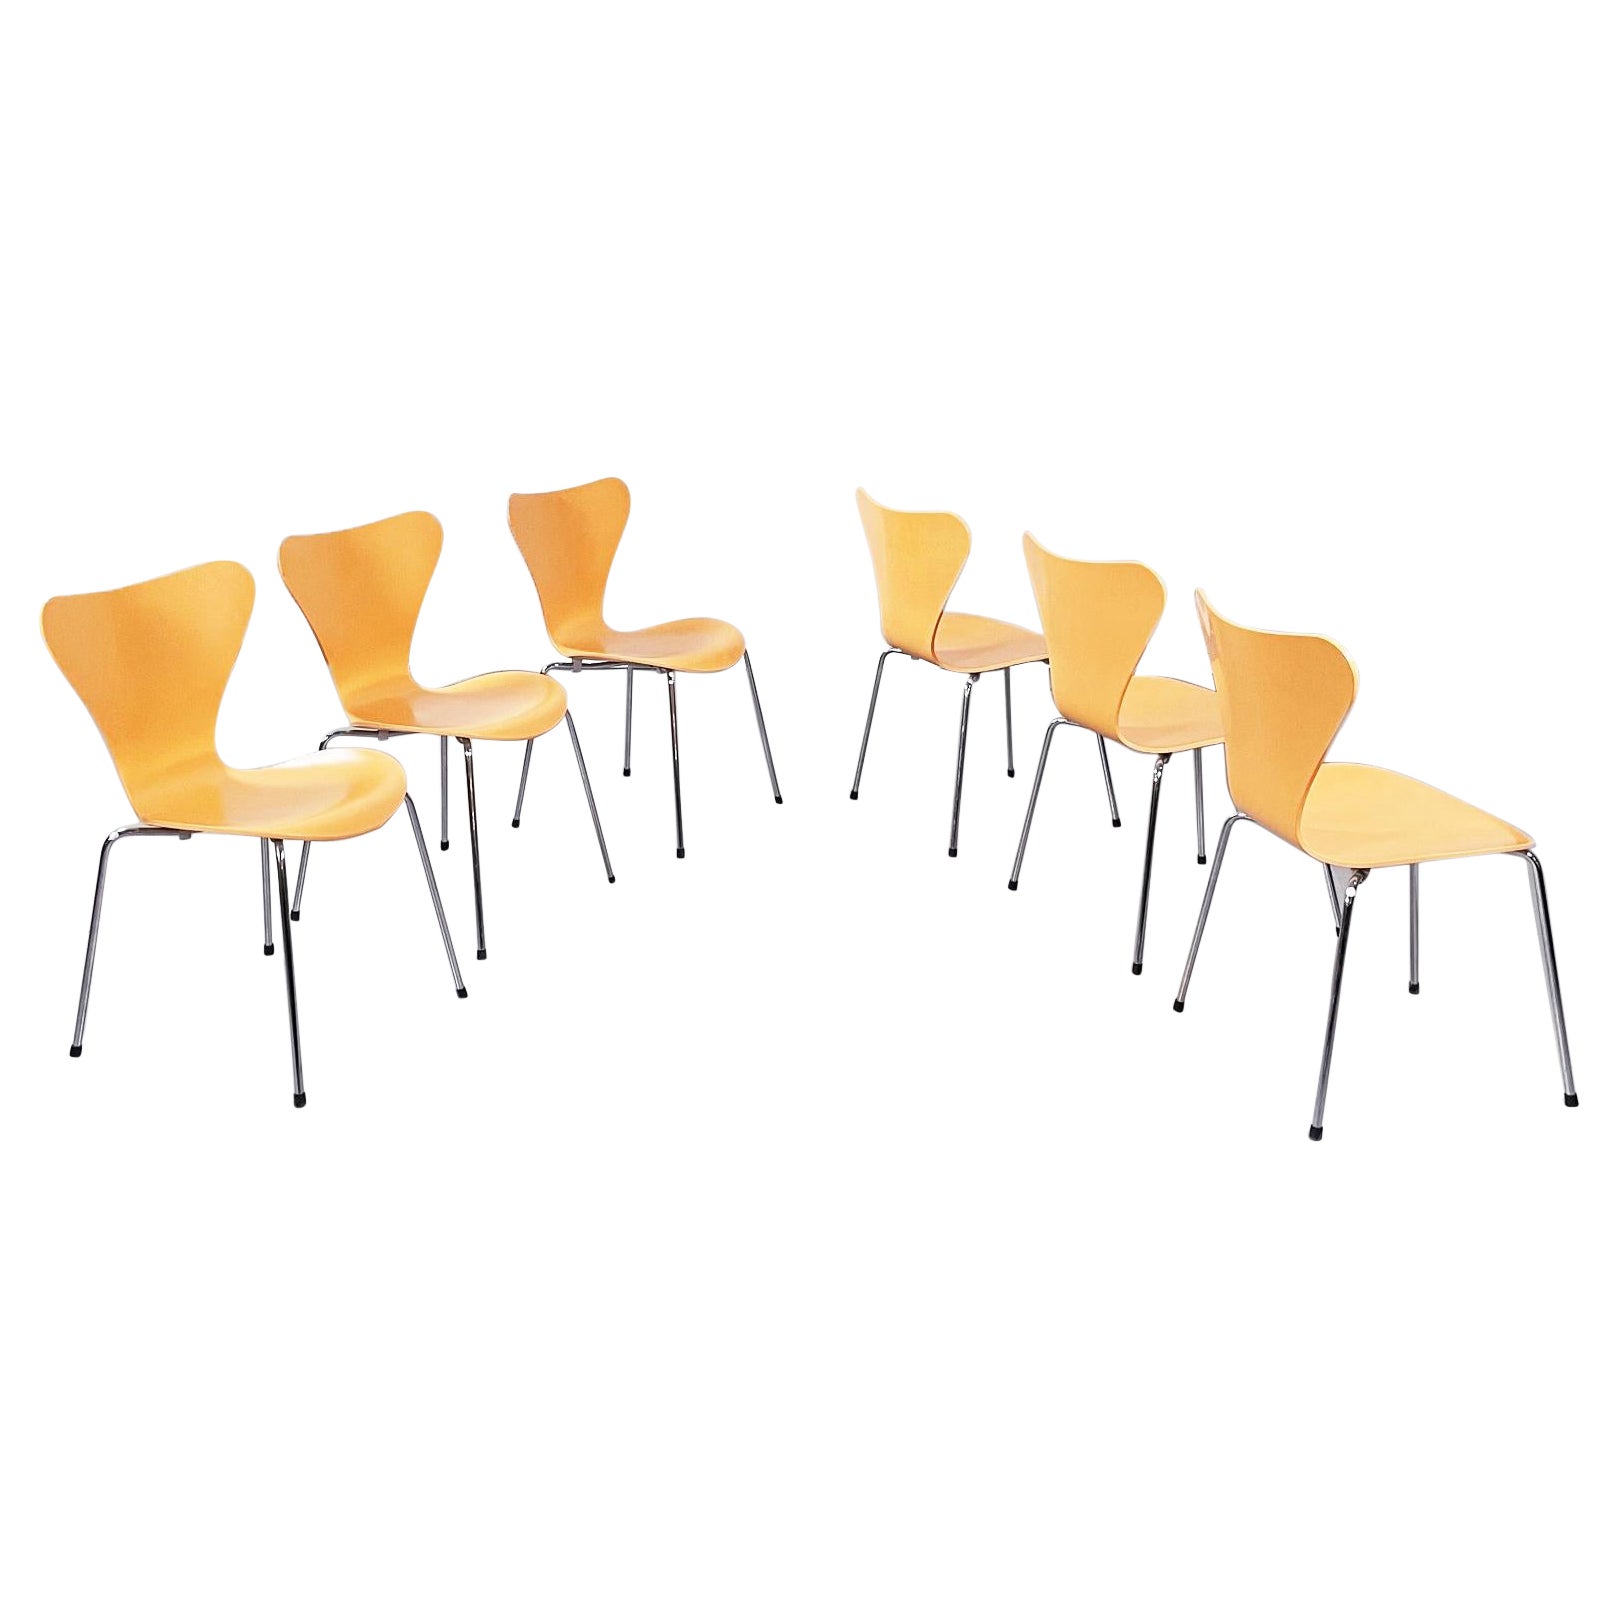 Italian Mid-century Orange wood Chairs Serie 7 by Jacobsen for Fritz Hansen, 1999 For Sale